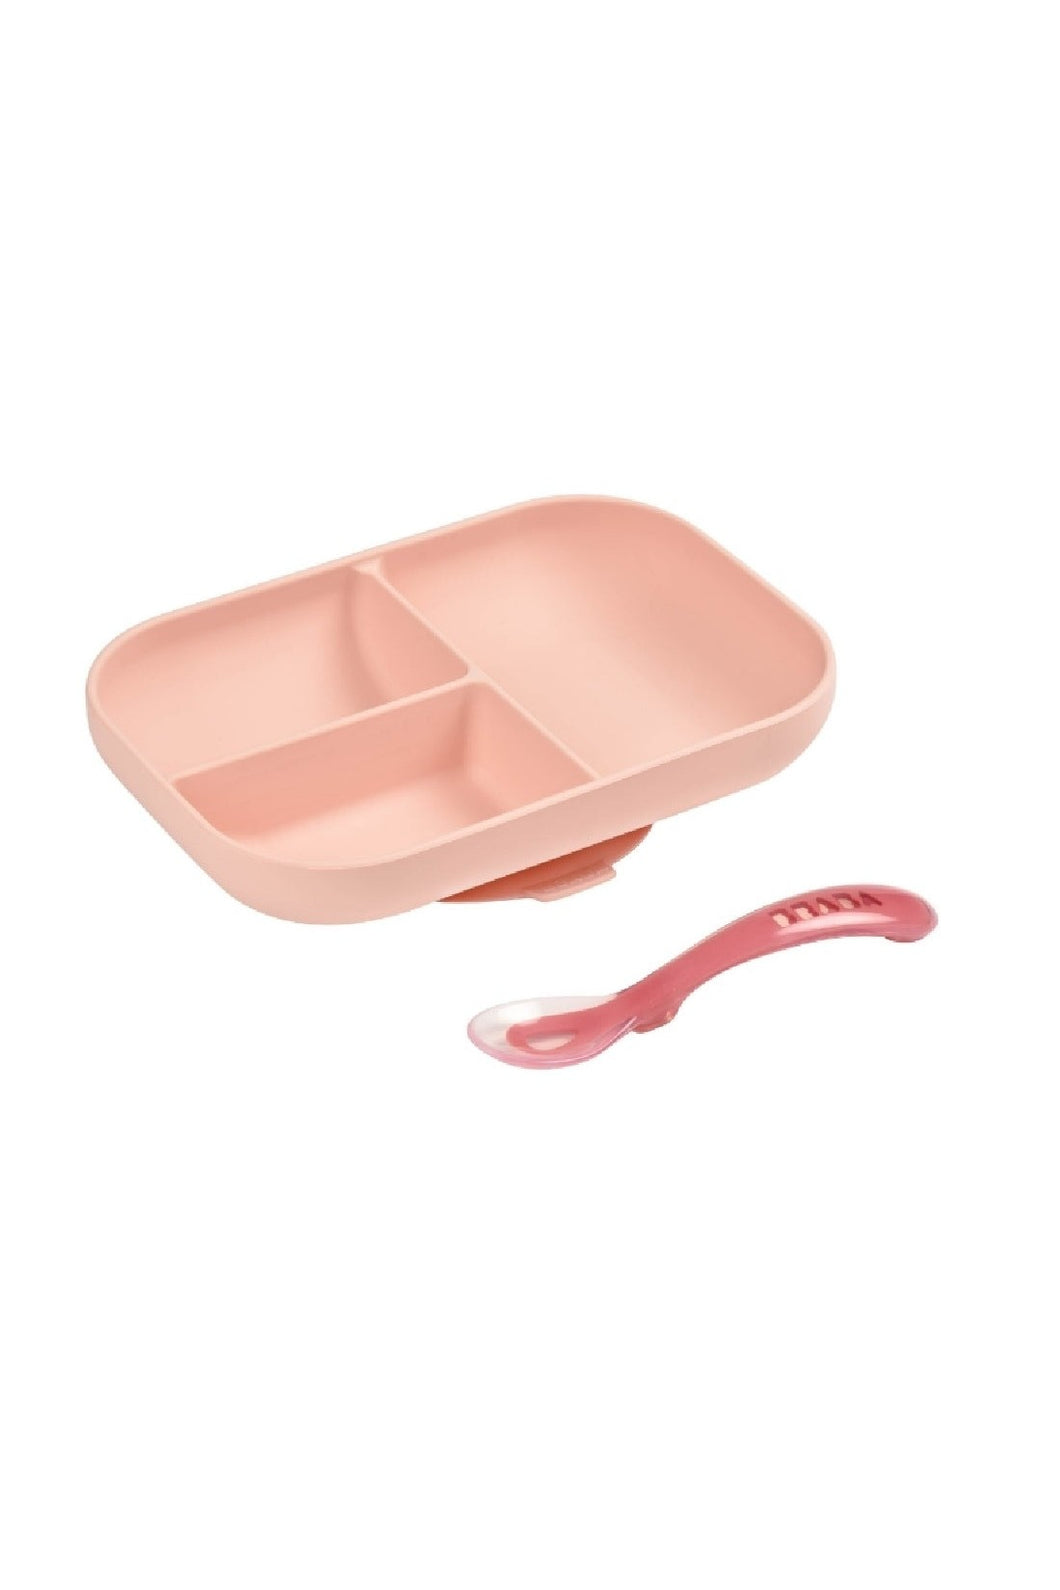 Beaba Silicone Suction Divided Plate 2Nd Age Spoon Pink 1